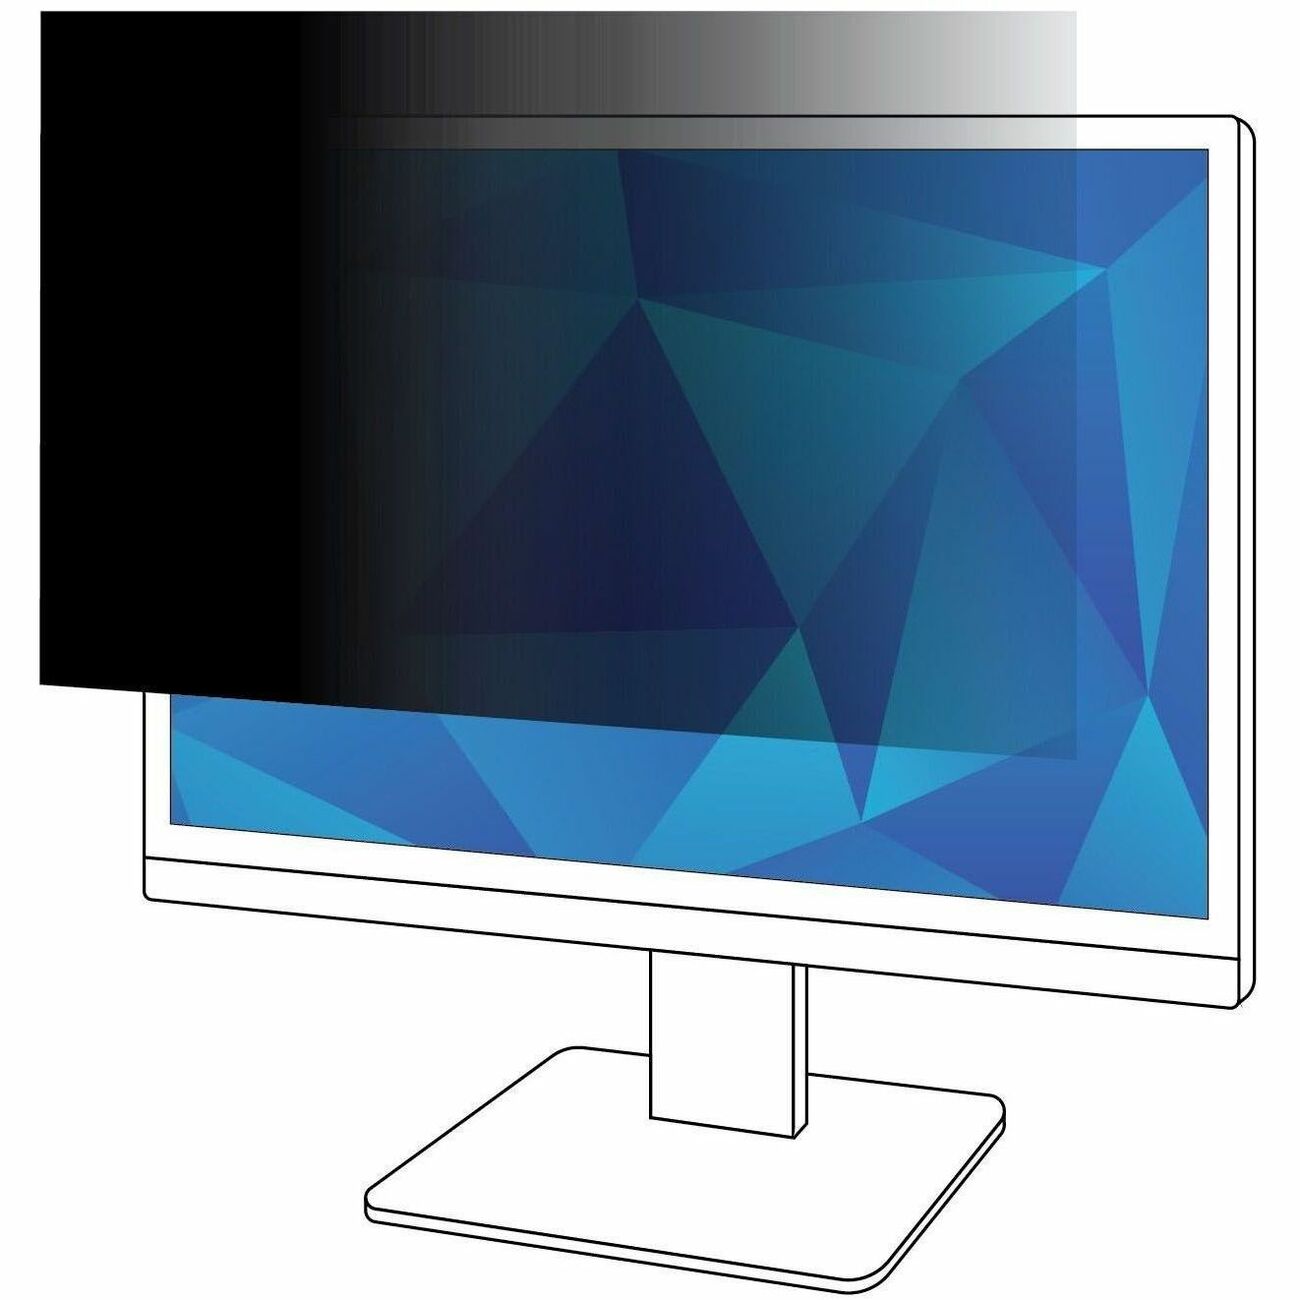 3m-privacy-filter-for-20in-monitor-169-pf200w9b-for-20-widescreen-lcd-monitor-169-scratch-resistant-fingerprint-resistant-dust-resistant-anti-glare_mmmpf200w9b - 1